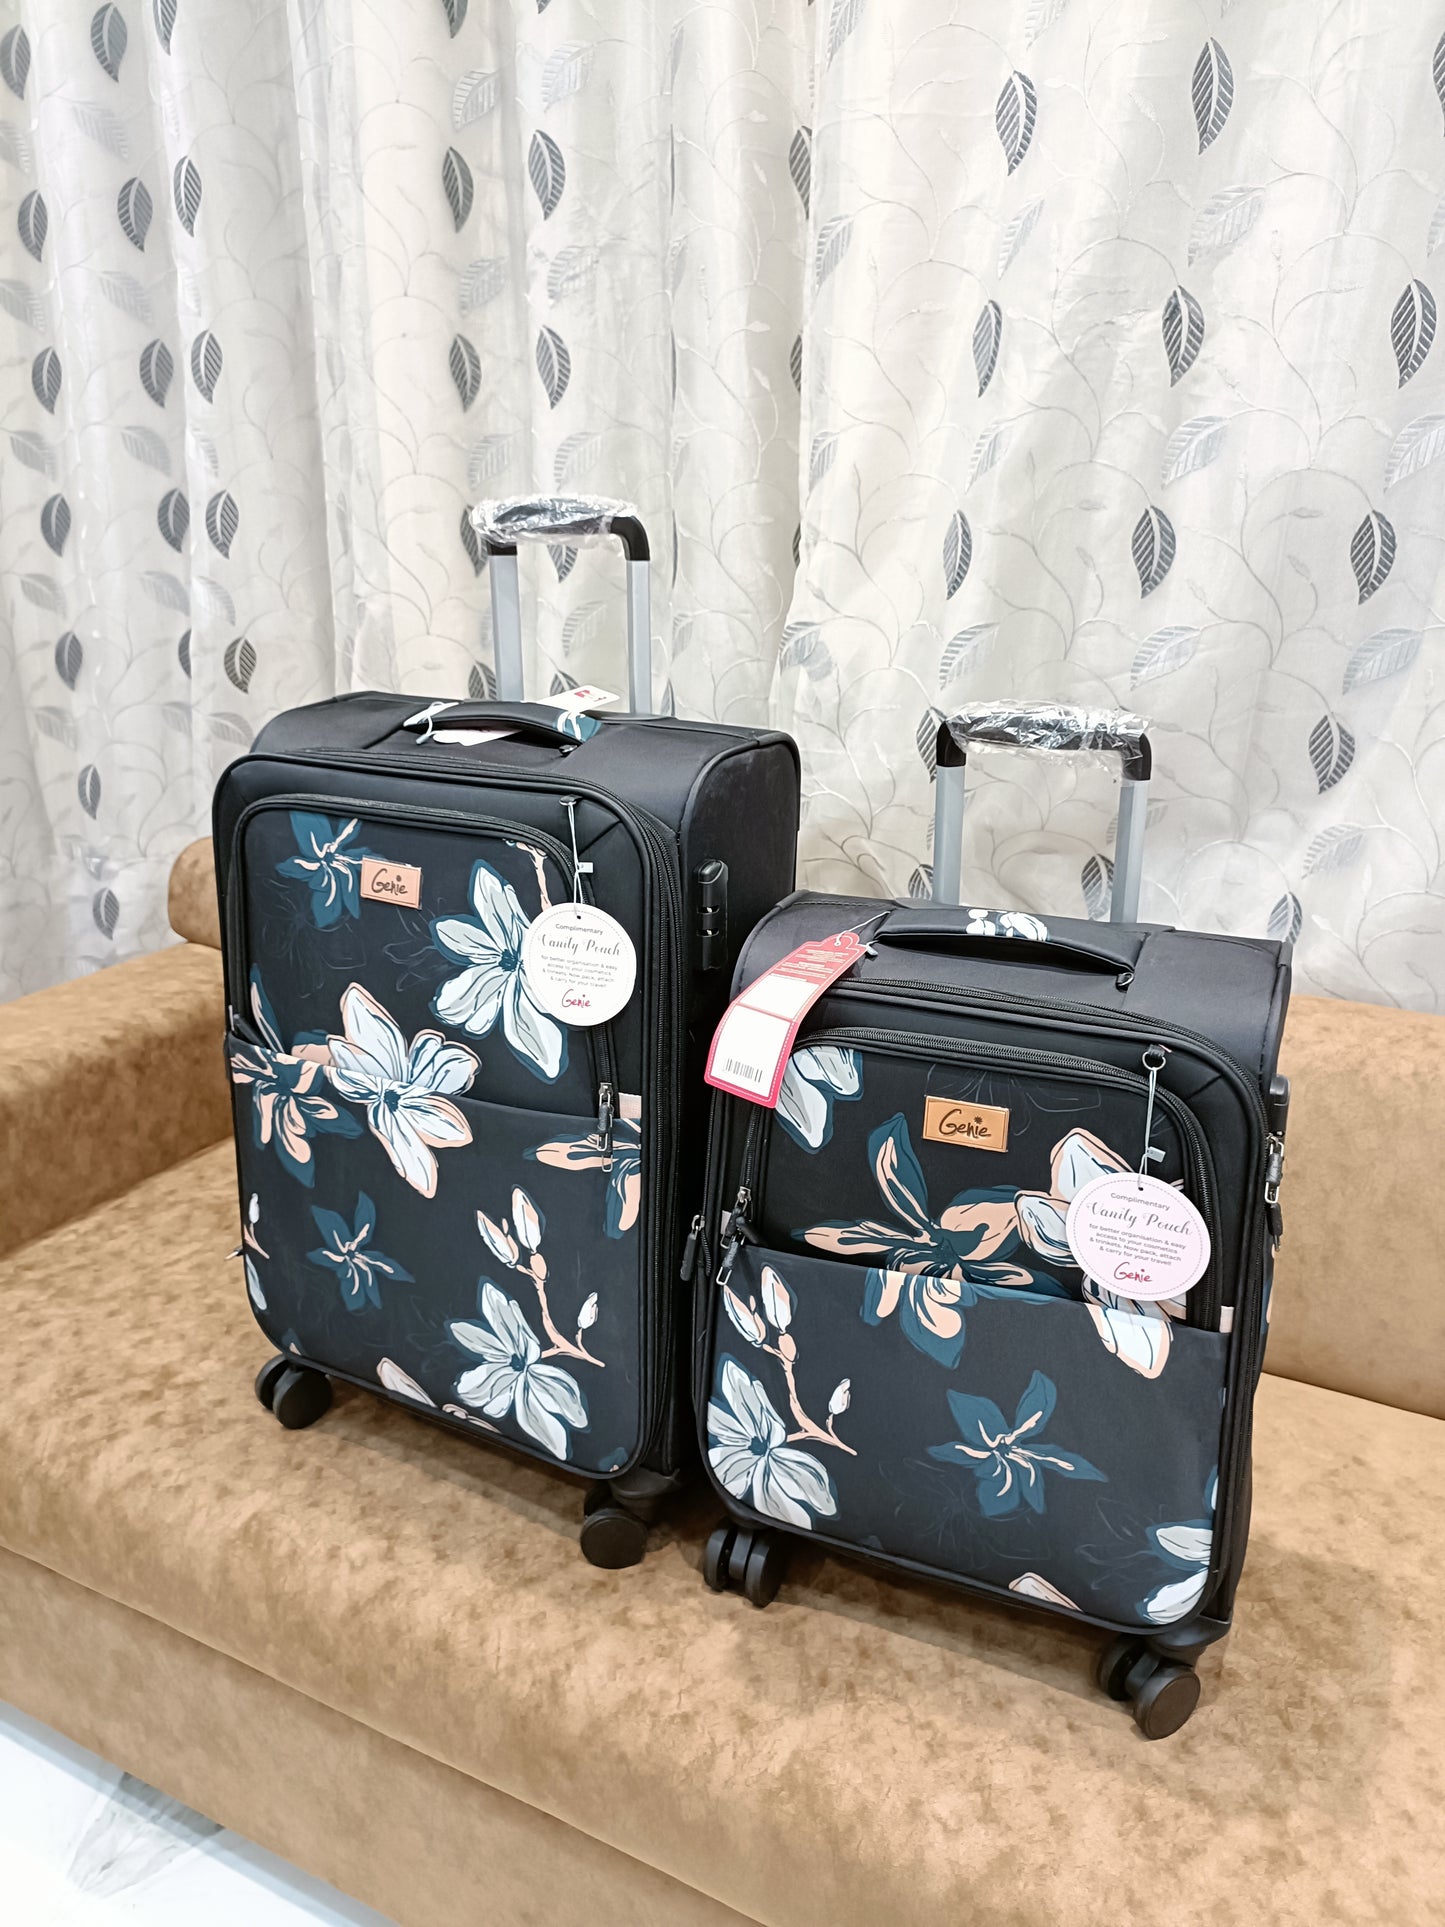 Genie Lily Pink Trolley Bag Dual Wheels & Fixed Combination Lock